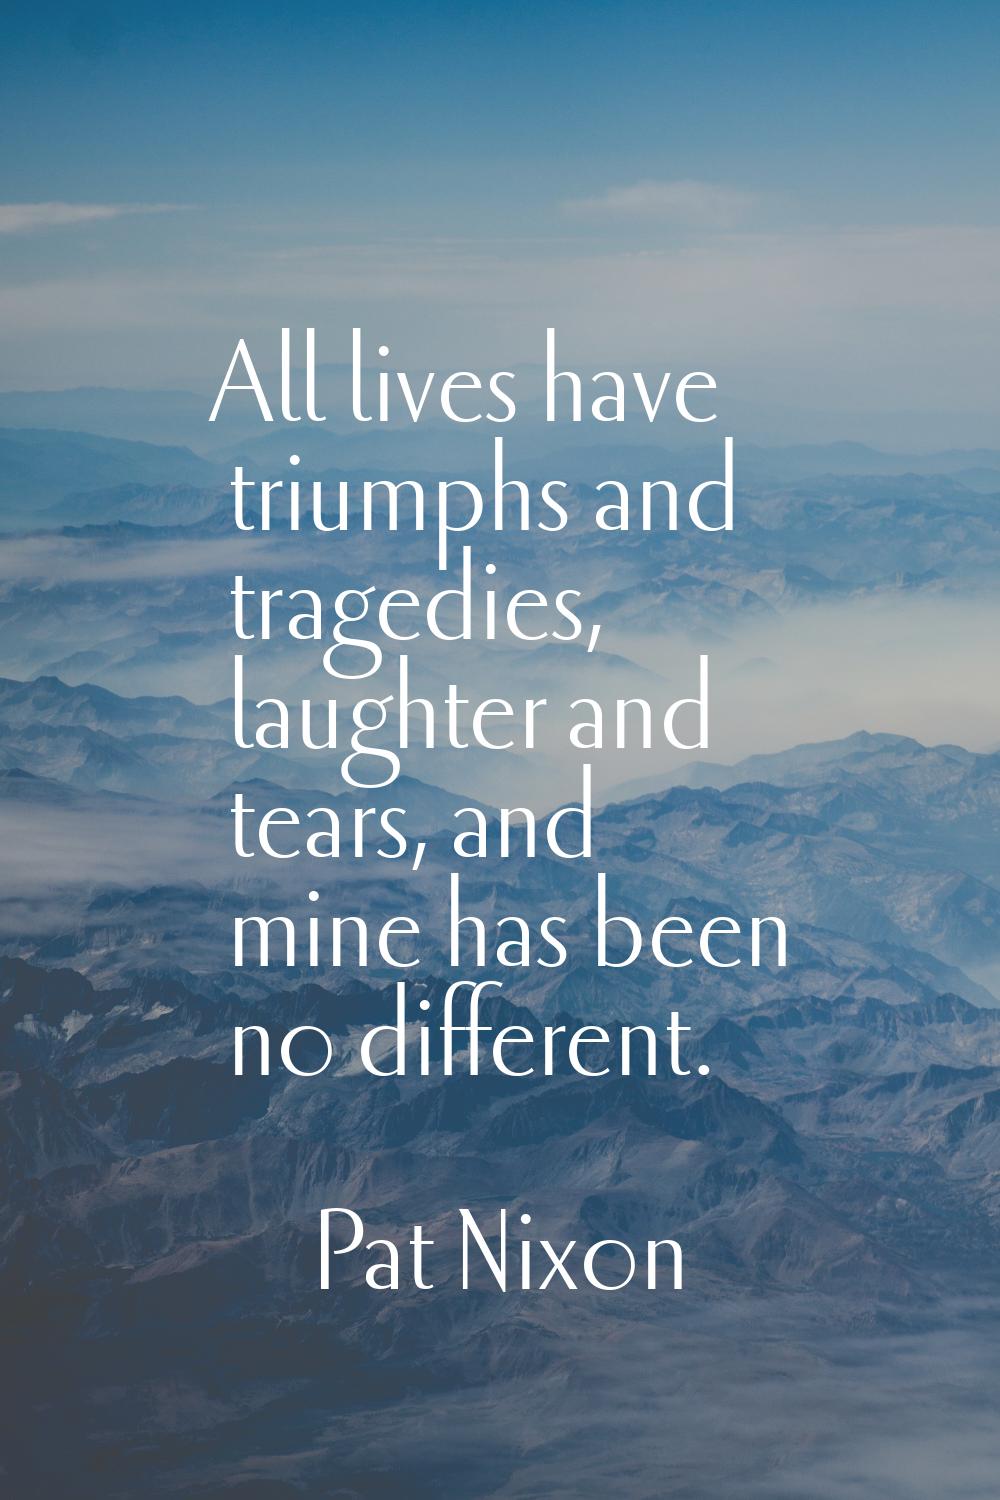 All lives have triumphs and tragedies, laughter and tears, and mine has been no different.